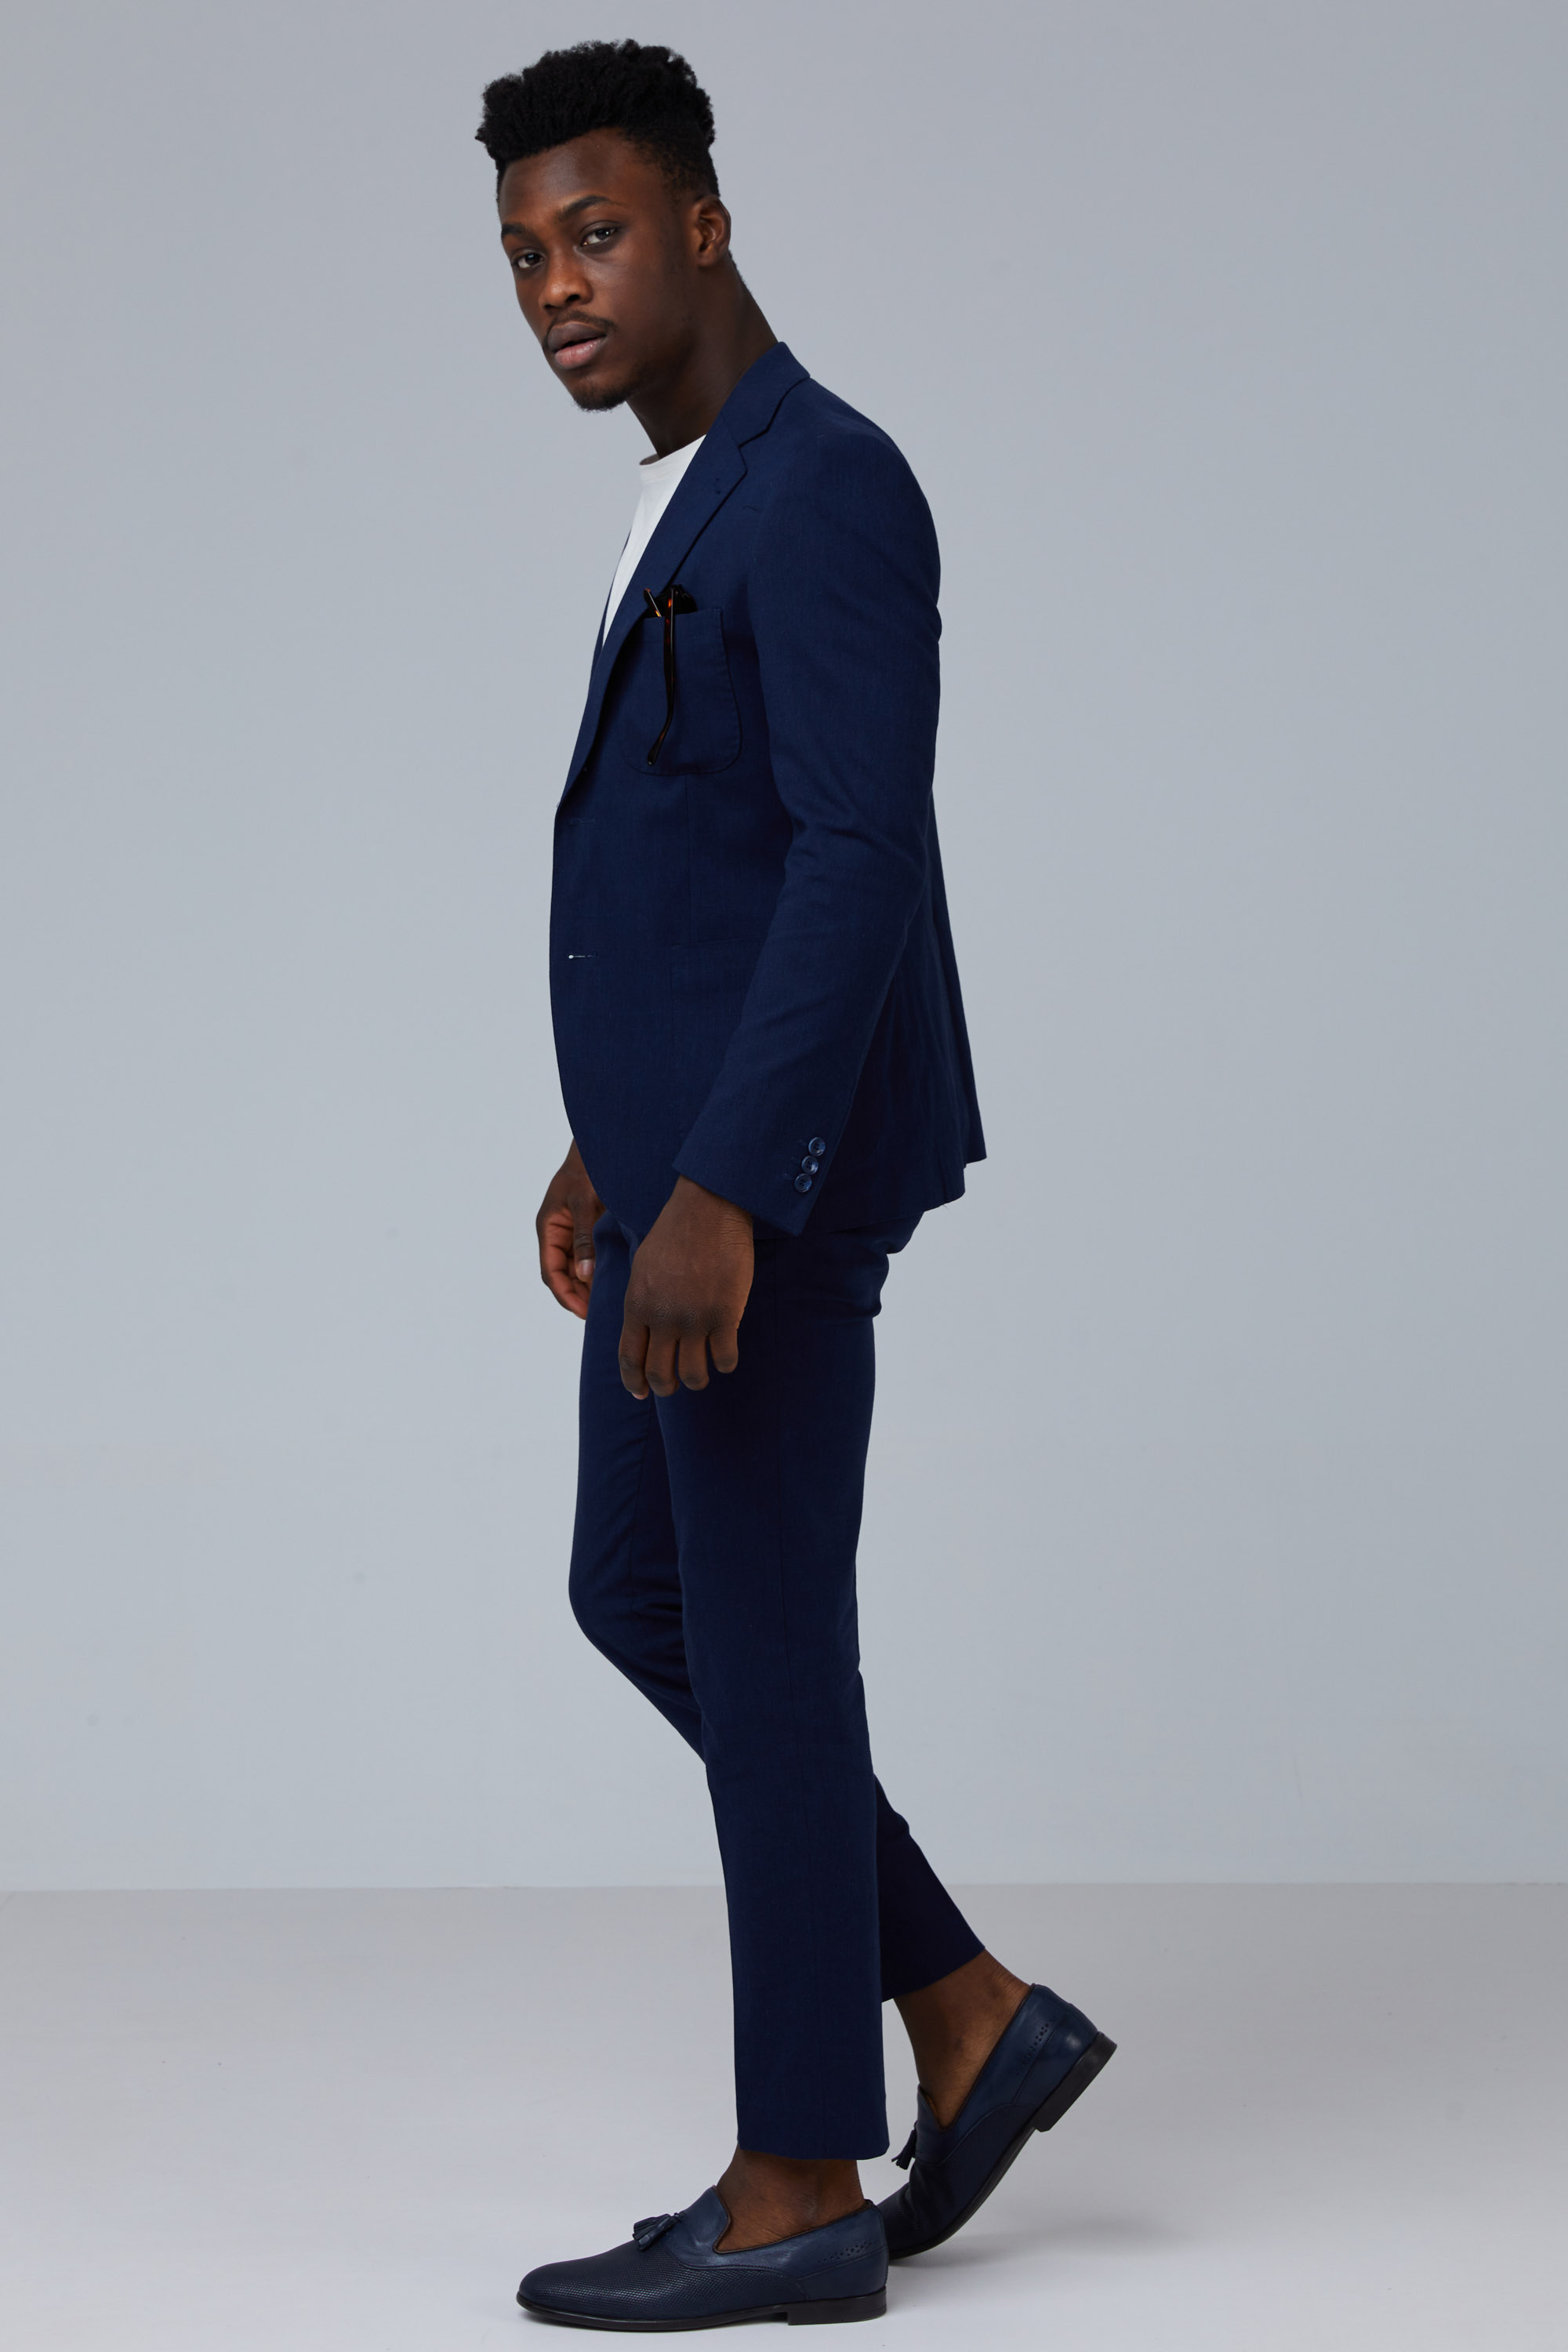 Blue Navy Suit With External Pockets In Slim Fit | Aristoteli Bitsiani